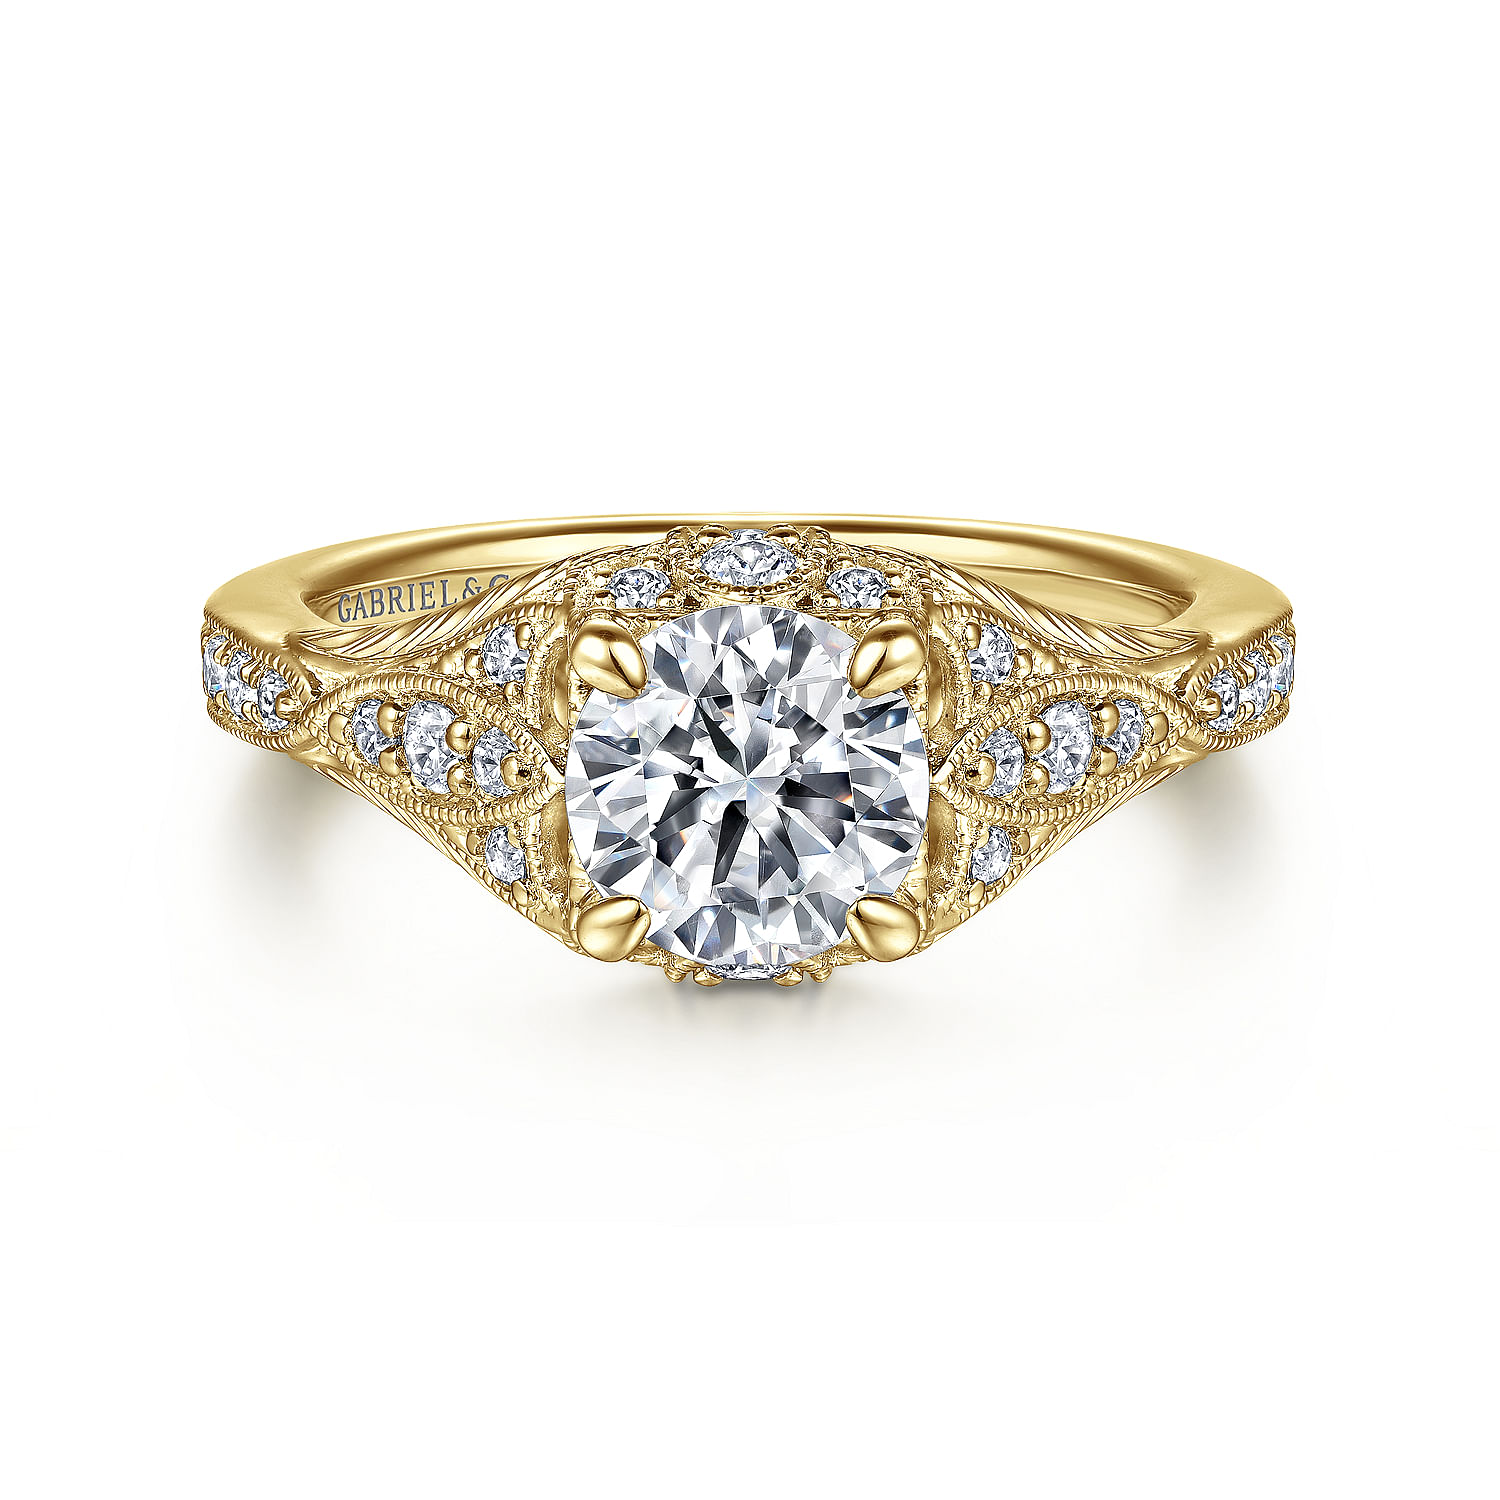 Gabriel - Unique 14K Yellow Gold Vintage Inspired Diamond Halo Engagement Ring